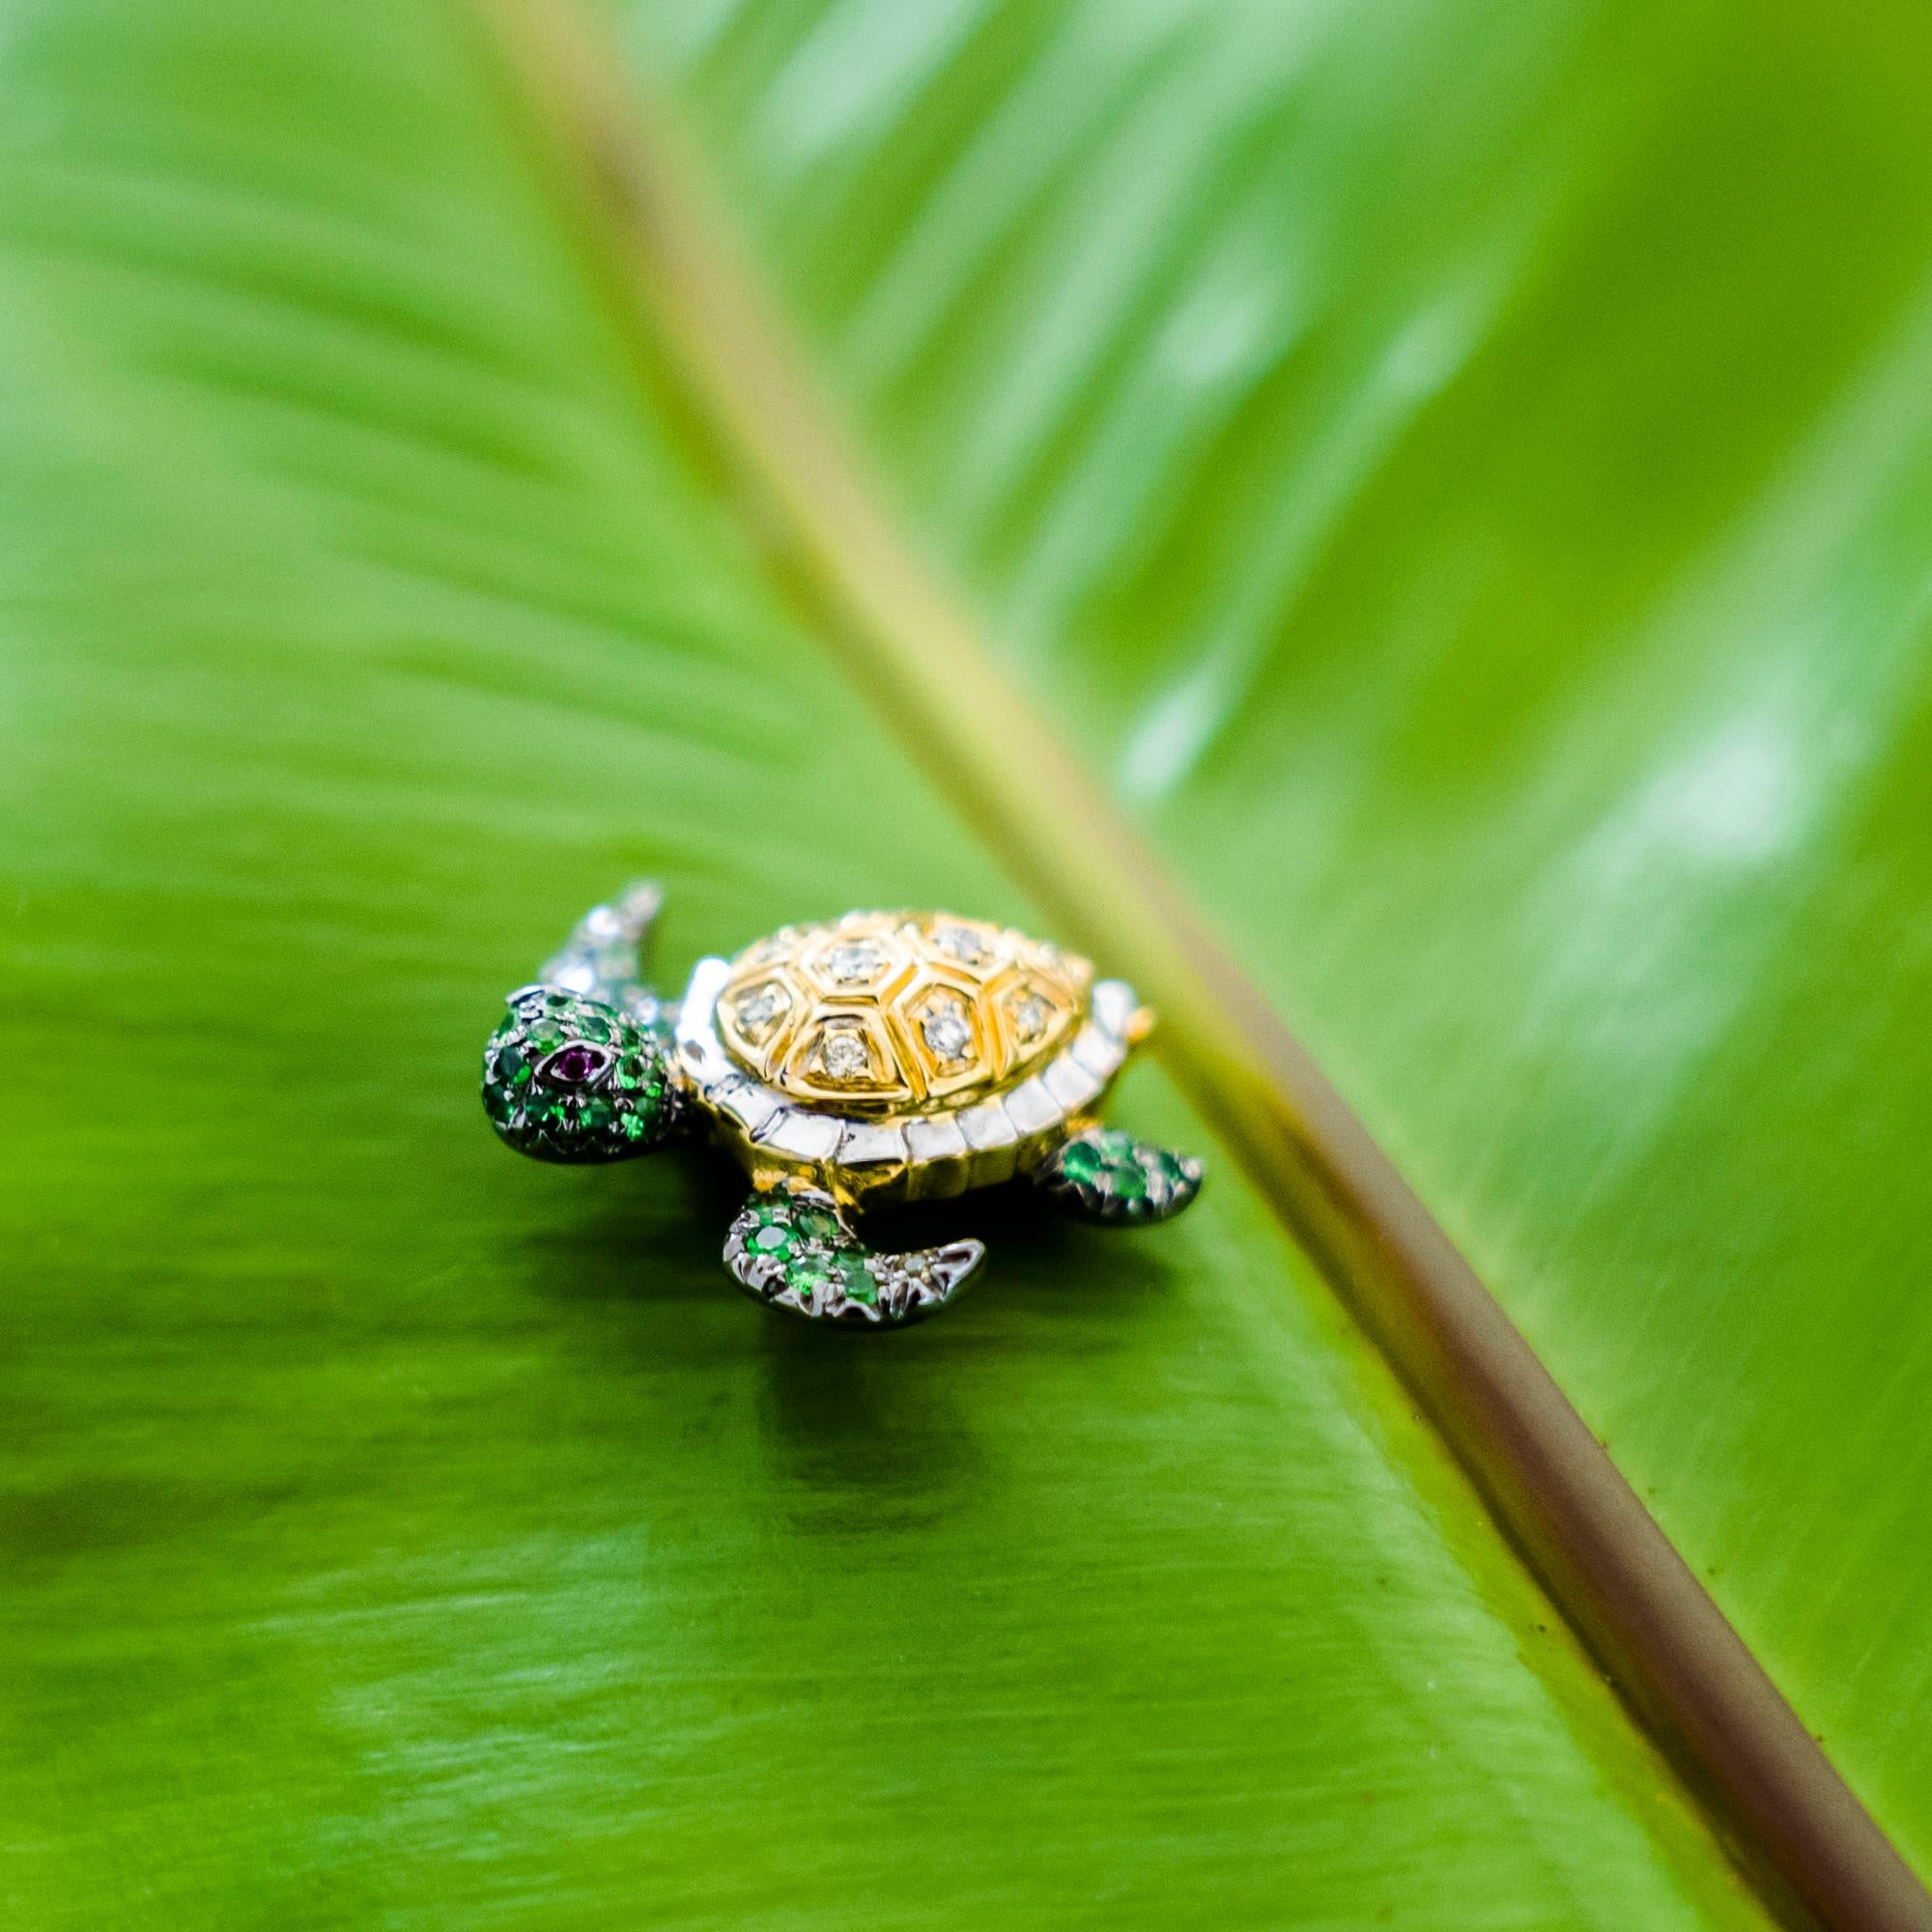 18K Turtle Mixed Diamond and Green Garnet Brooch

10 Mixed Colored Diamonds - 0.08 CT
42 Green Garnets - 0.35 CT
2 Rubies - 0.01 CT
2 Yellow Sapphires - 0.02 CT
18K Gold - 3.95 GM

Turtle represents intuitive development, protection, wisdom,